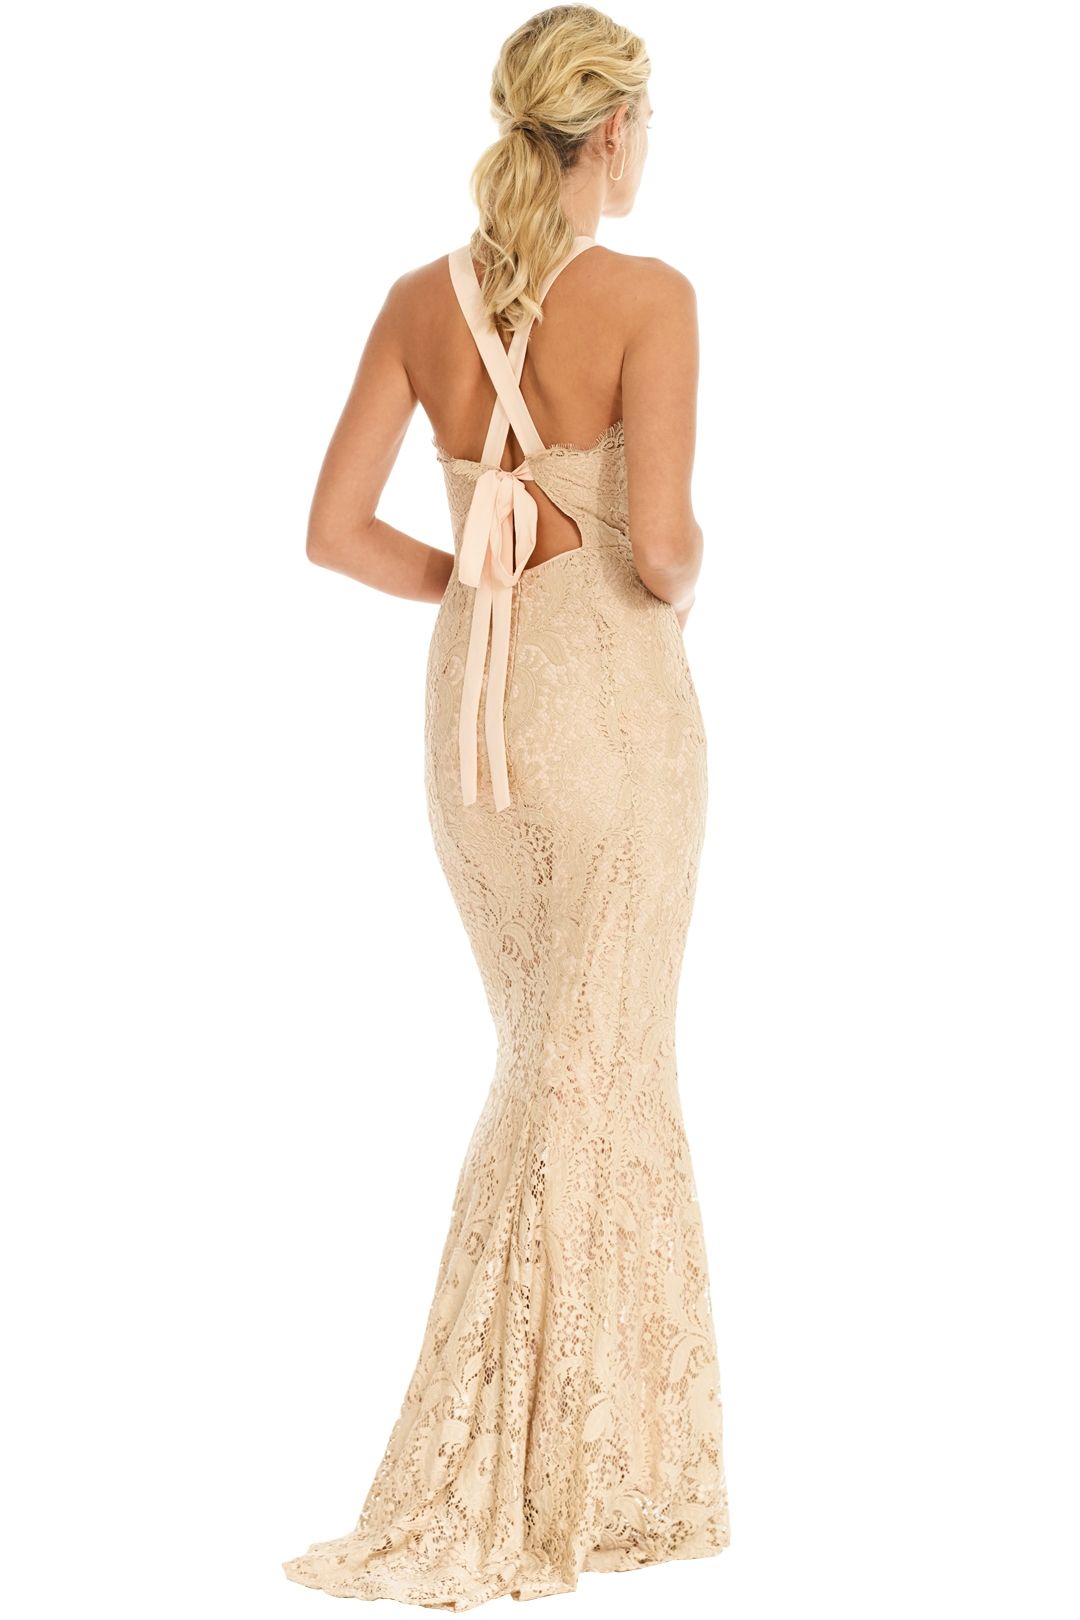 Grace and Hart - Mystic Lace Cross Back Gown - Nude - Back